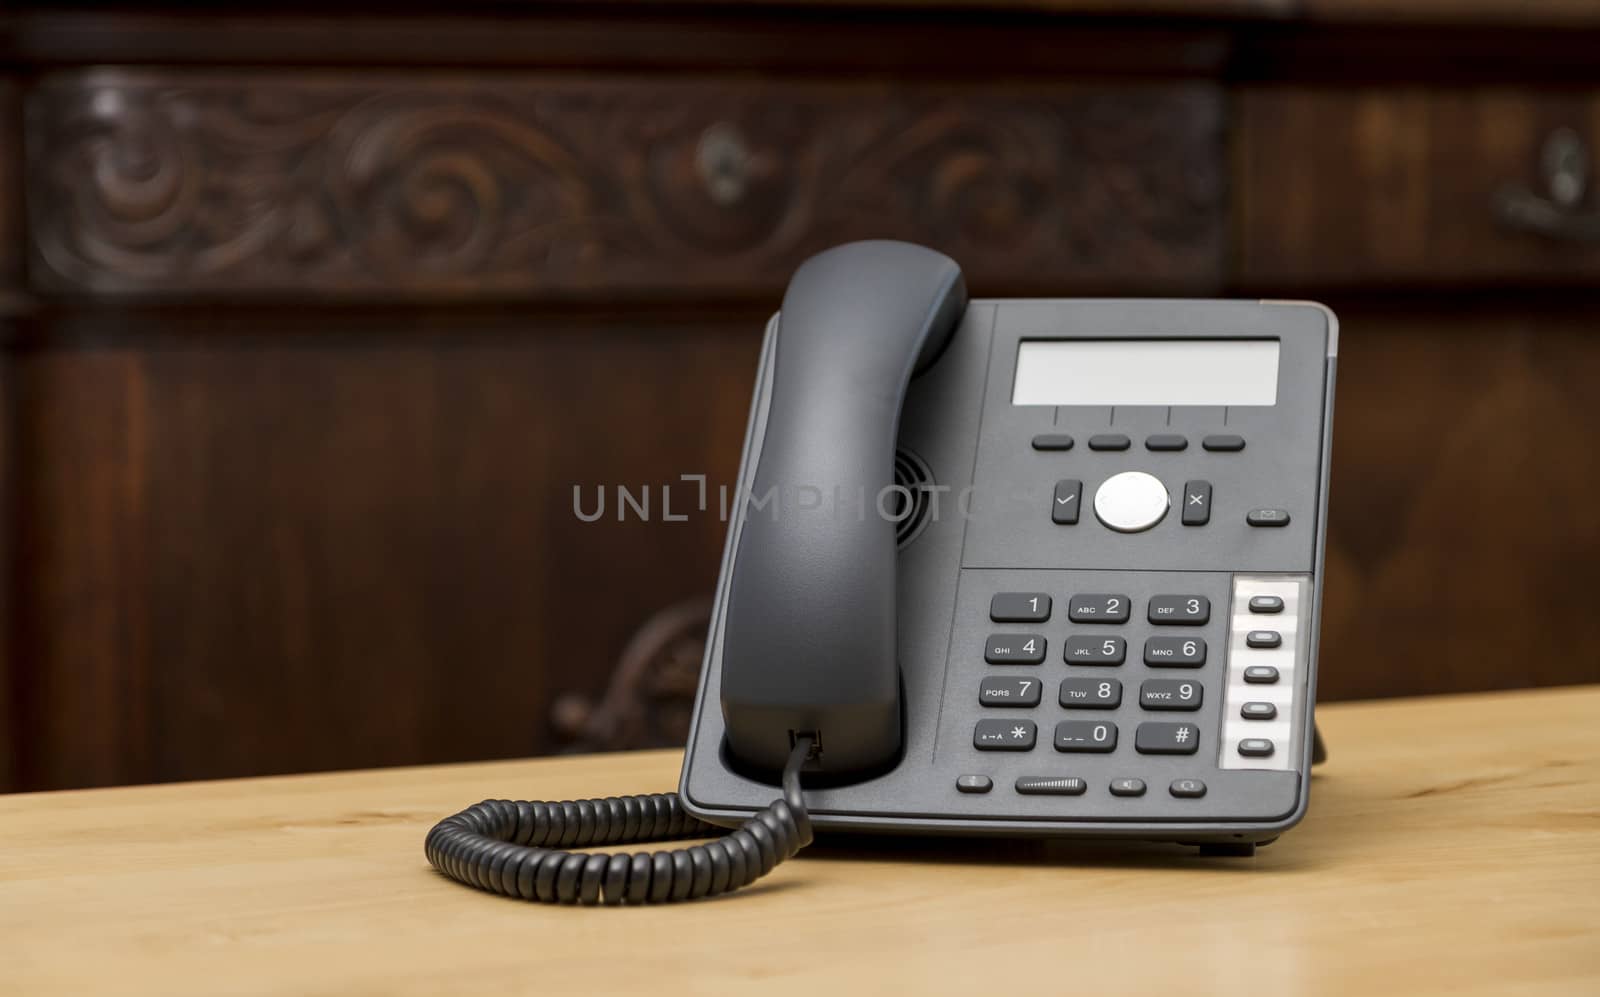 modern phone on wooden table in living room with old commode